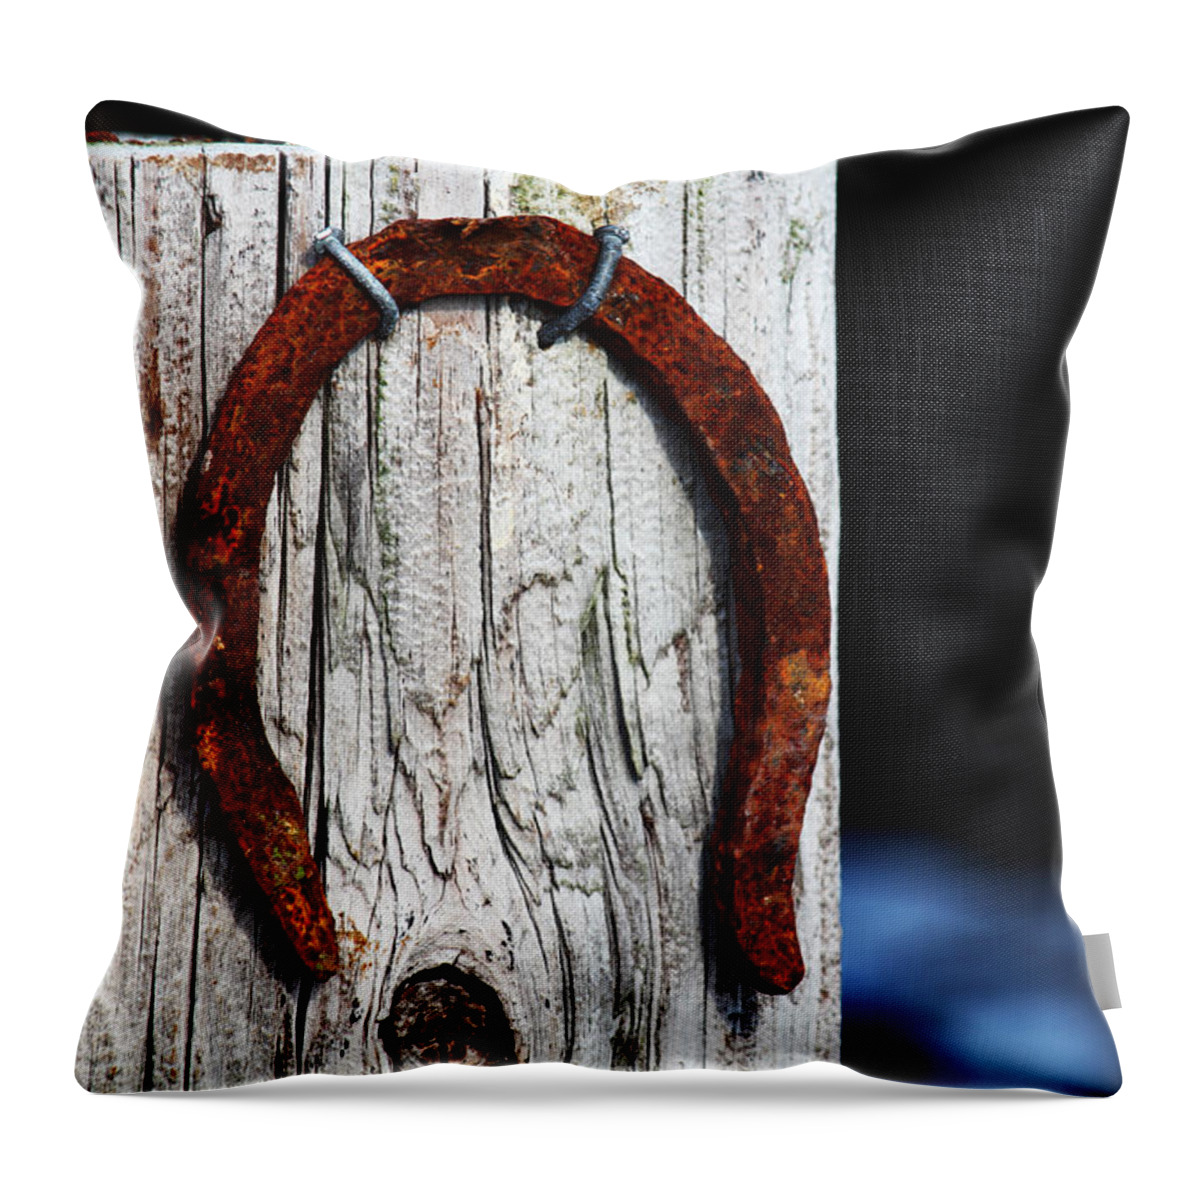 Apacheco Throw Pillow featuring the photograph Lucky by Andrew Pacheco